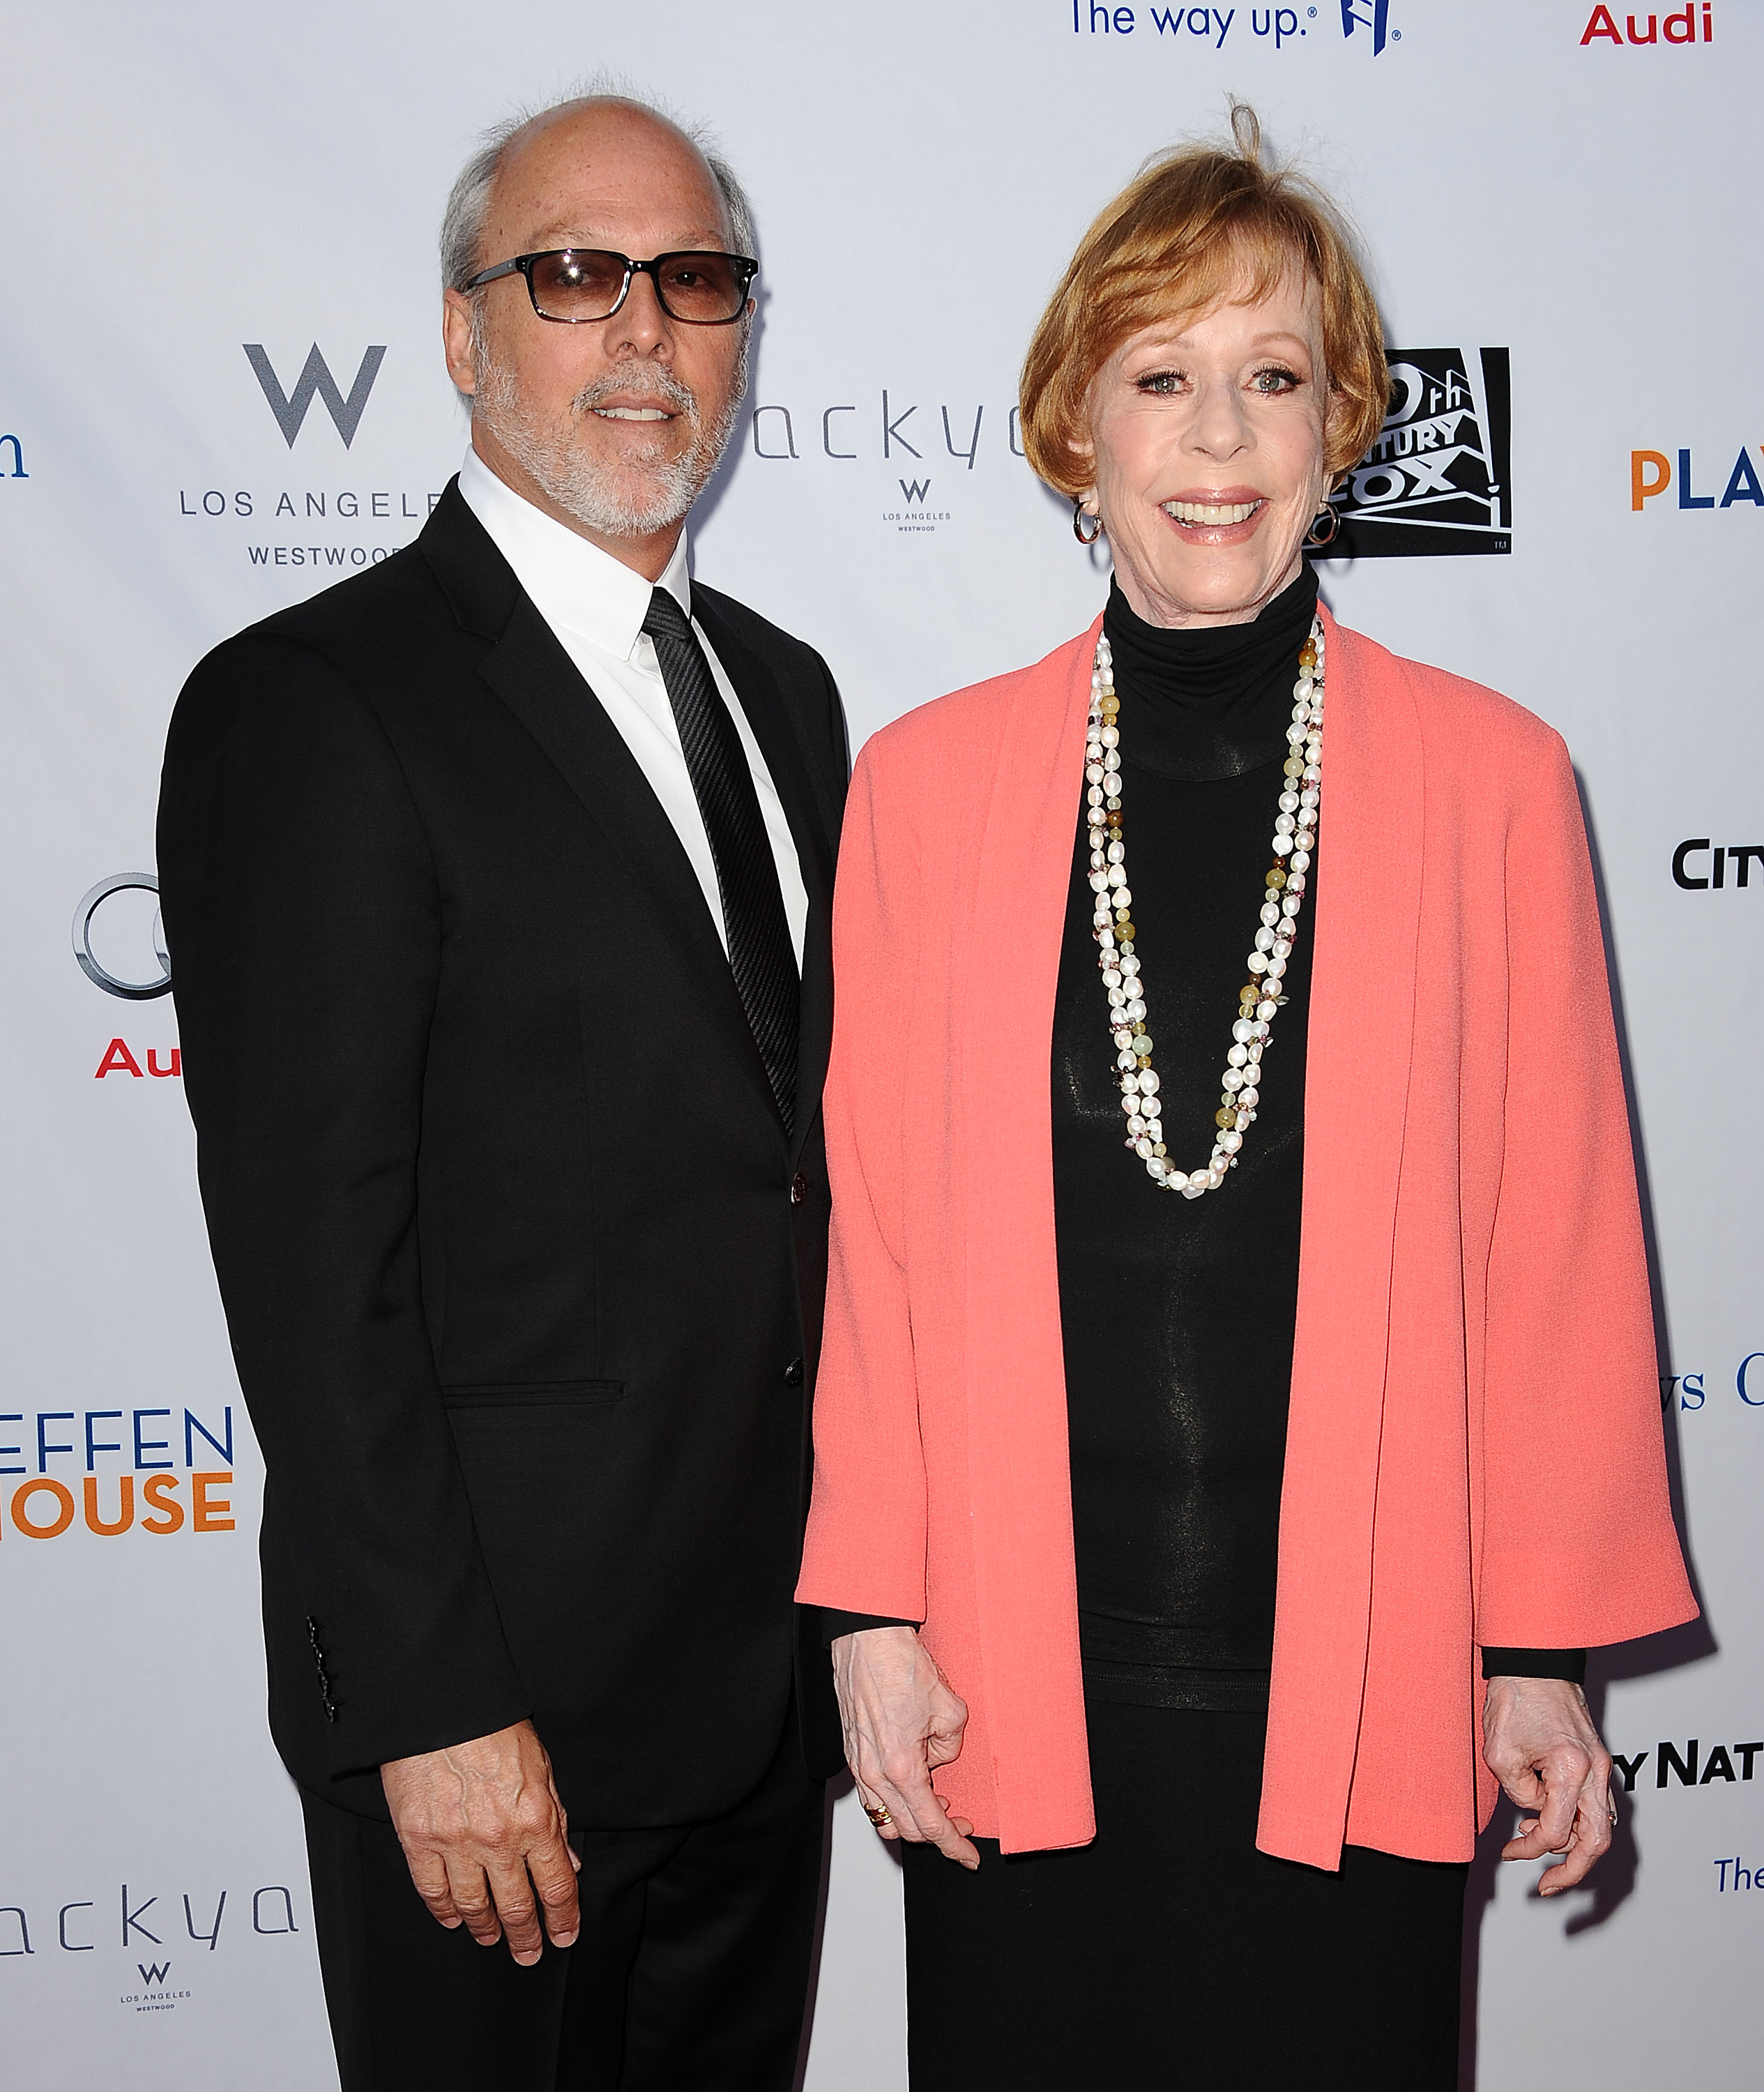 Brian Miller and Carol Burnett at the Backstage at The Geffen fundraiser at Geffen Playhouse in Los Angeles, California, on June 4, 2012